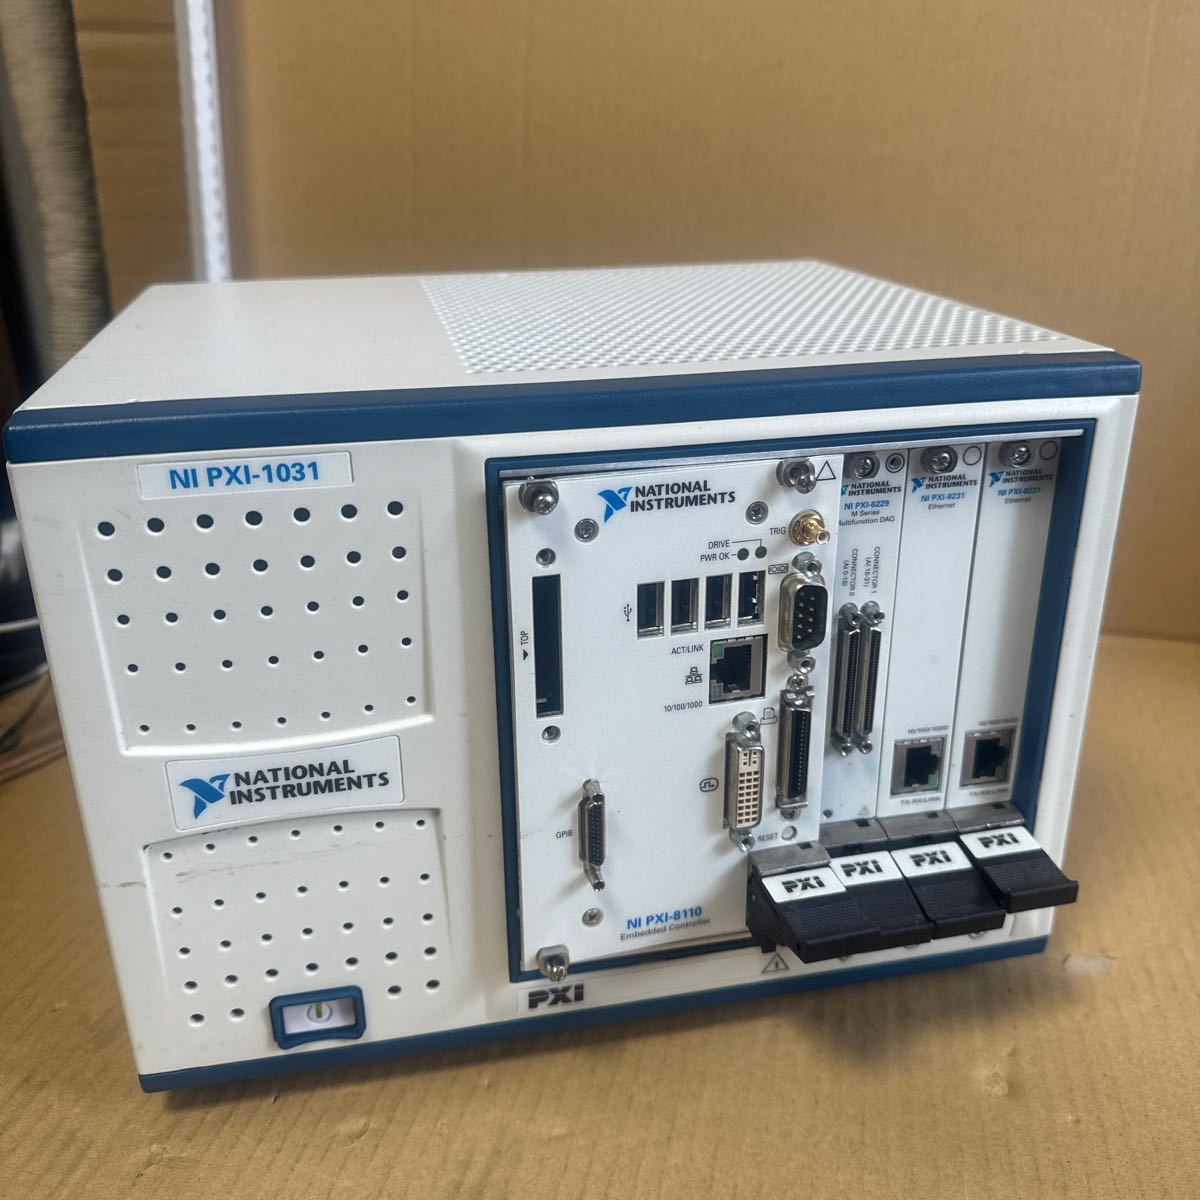 （H-6）NATIONAL INSTRUMENTS ナショナルインスツルメンツ 測定テスト装置 PXI-1031 / PXI-8110 PXI-6229 PXI-8231x2_画像1